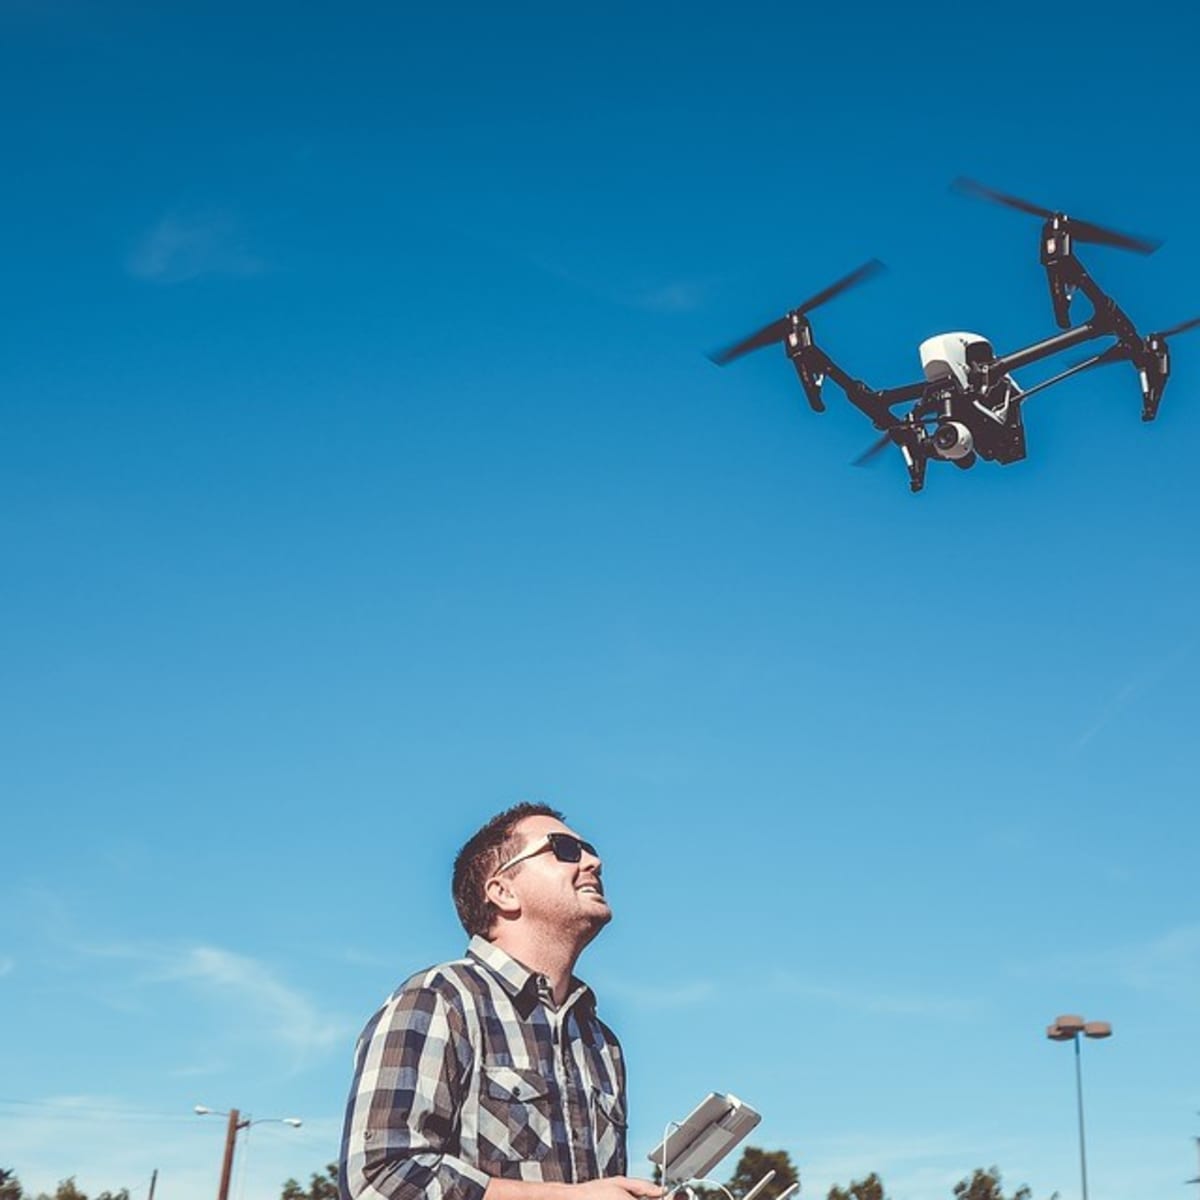 kimplante dukke pude 5 Tips for Buying Your First Drone - TurboFuture